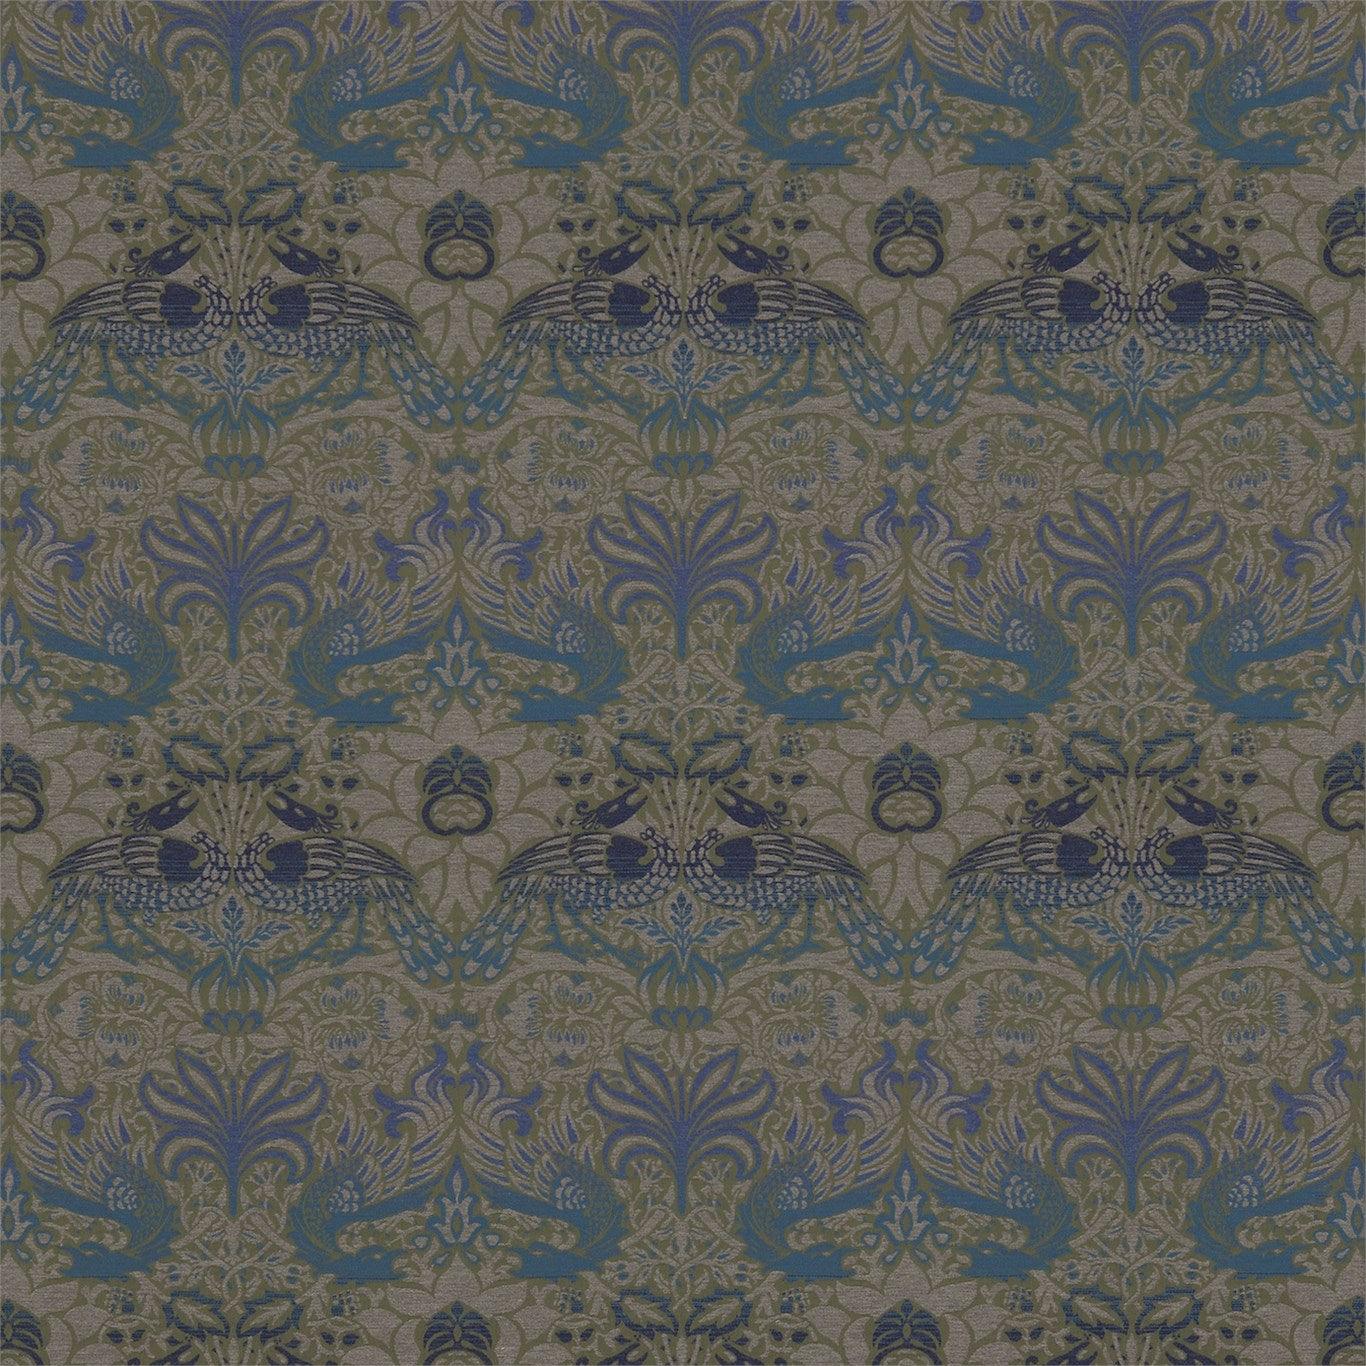 William Morris Fabric- Peacock and Dragon Tapestry